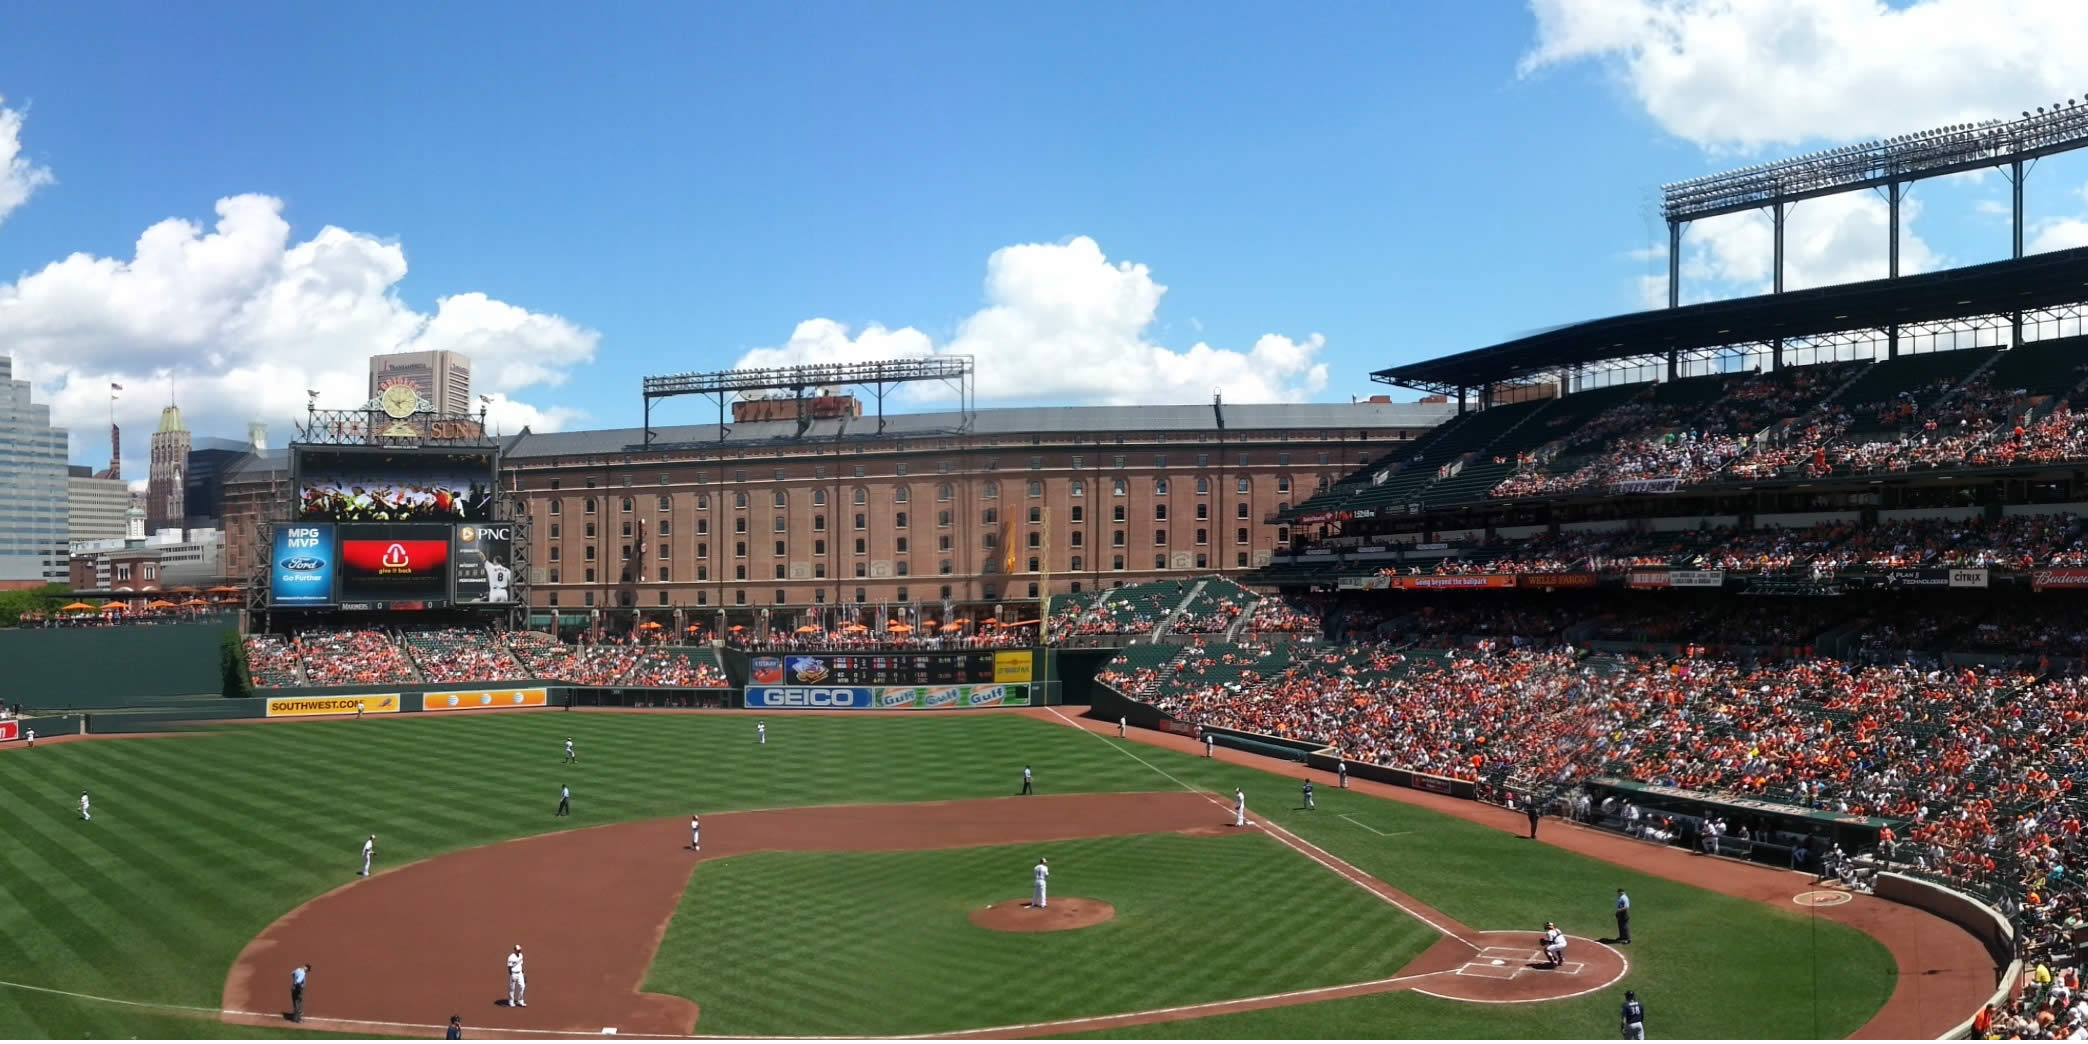 Orioles Park Seating Chart View